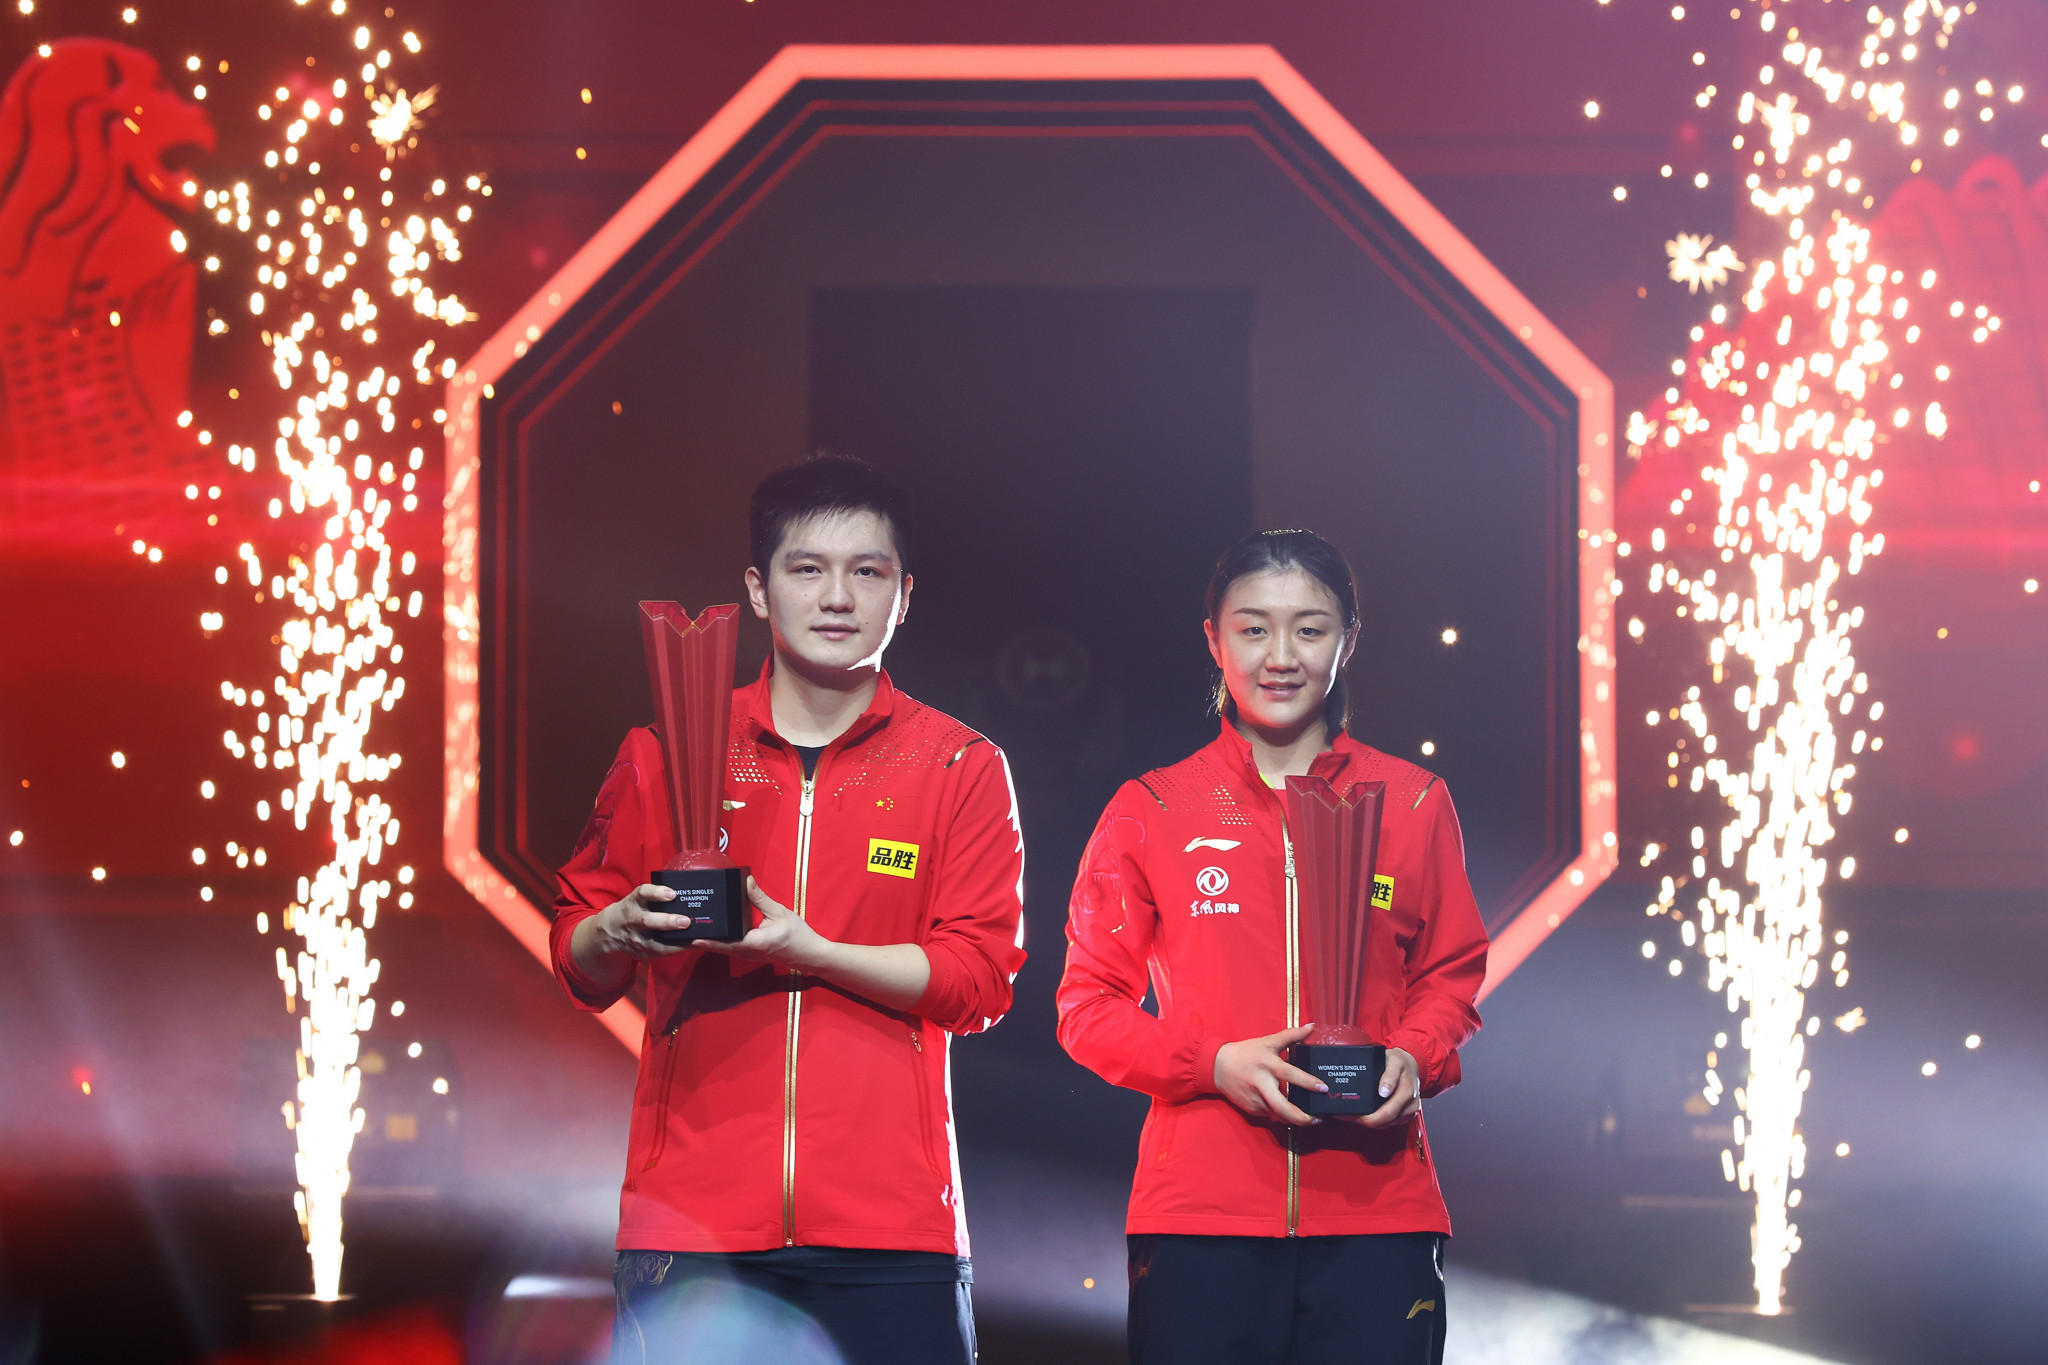 Fan and Chen win epic finals to secure WTT Grand Smash crowns in Singapore 